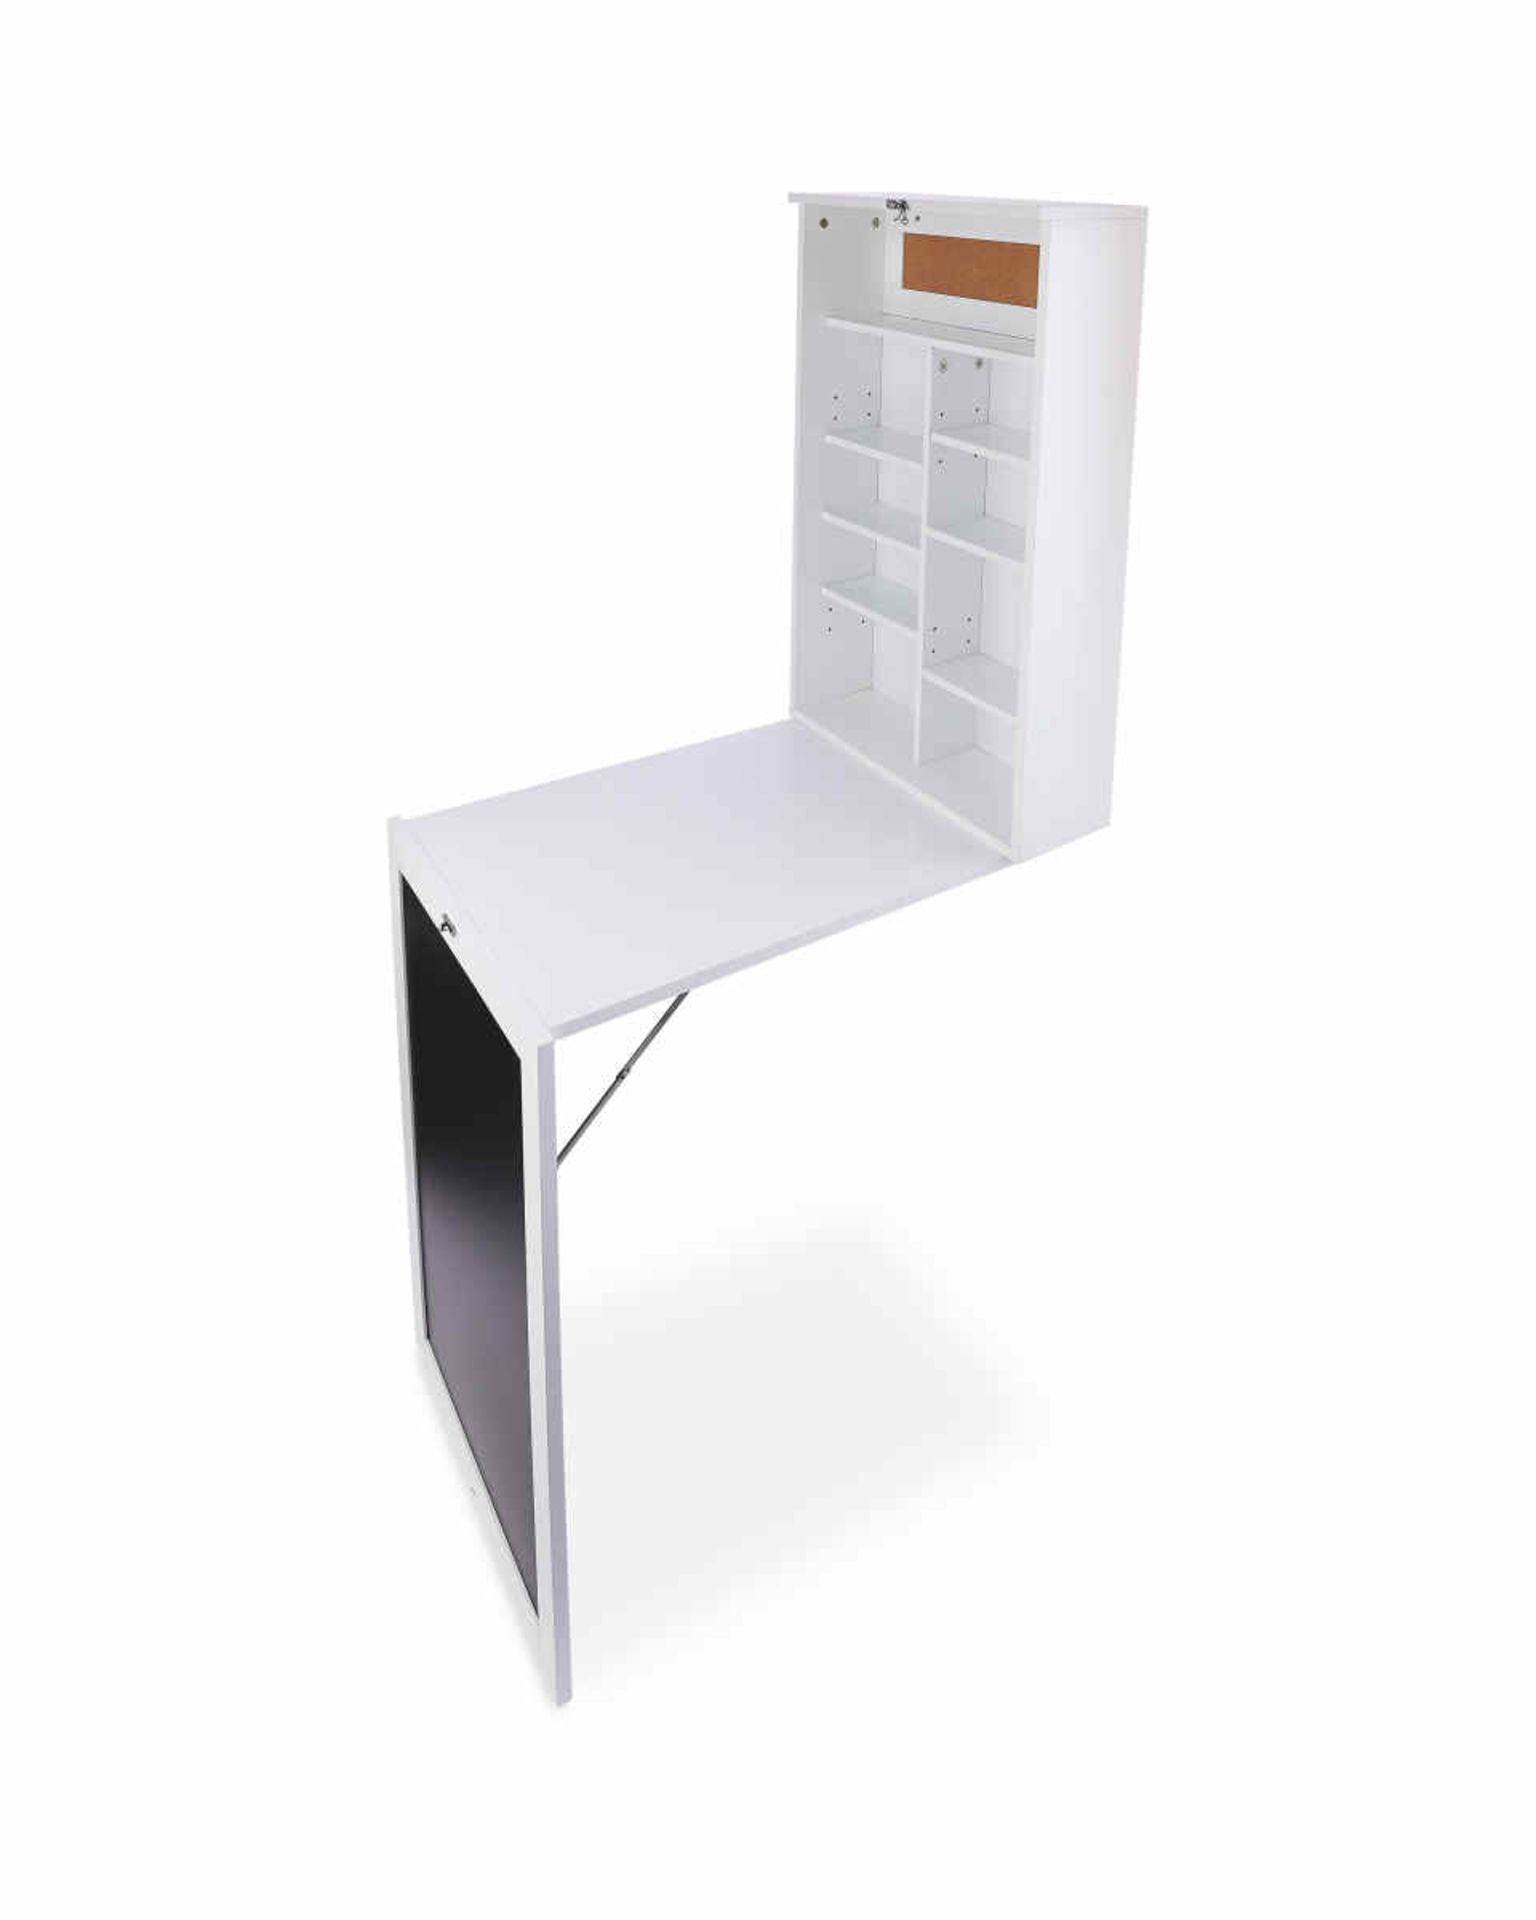 Compact Living Desk Solution. Revamp your working space with this Compact Living Desk Solution by - Image 2 of 2